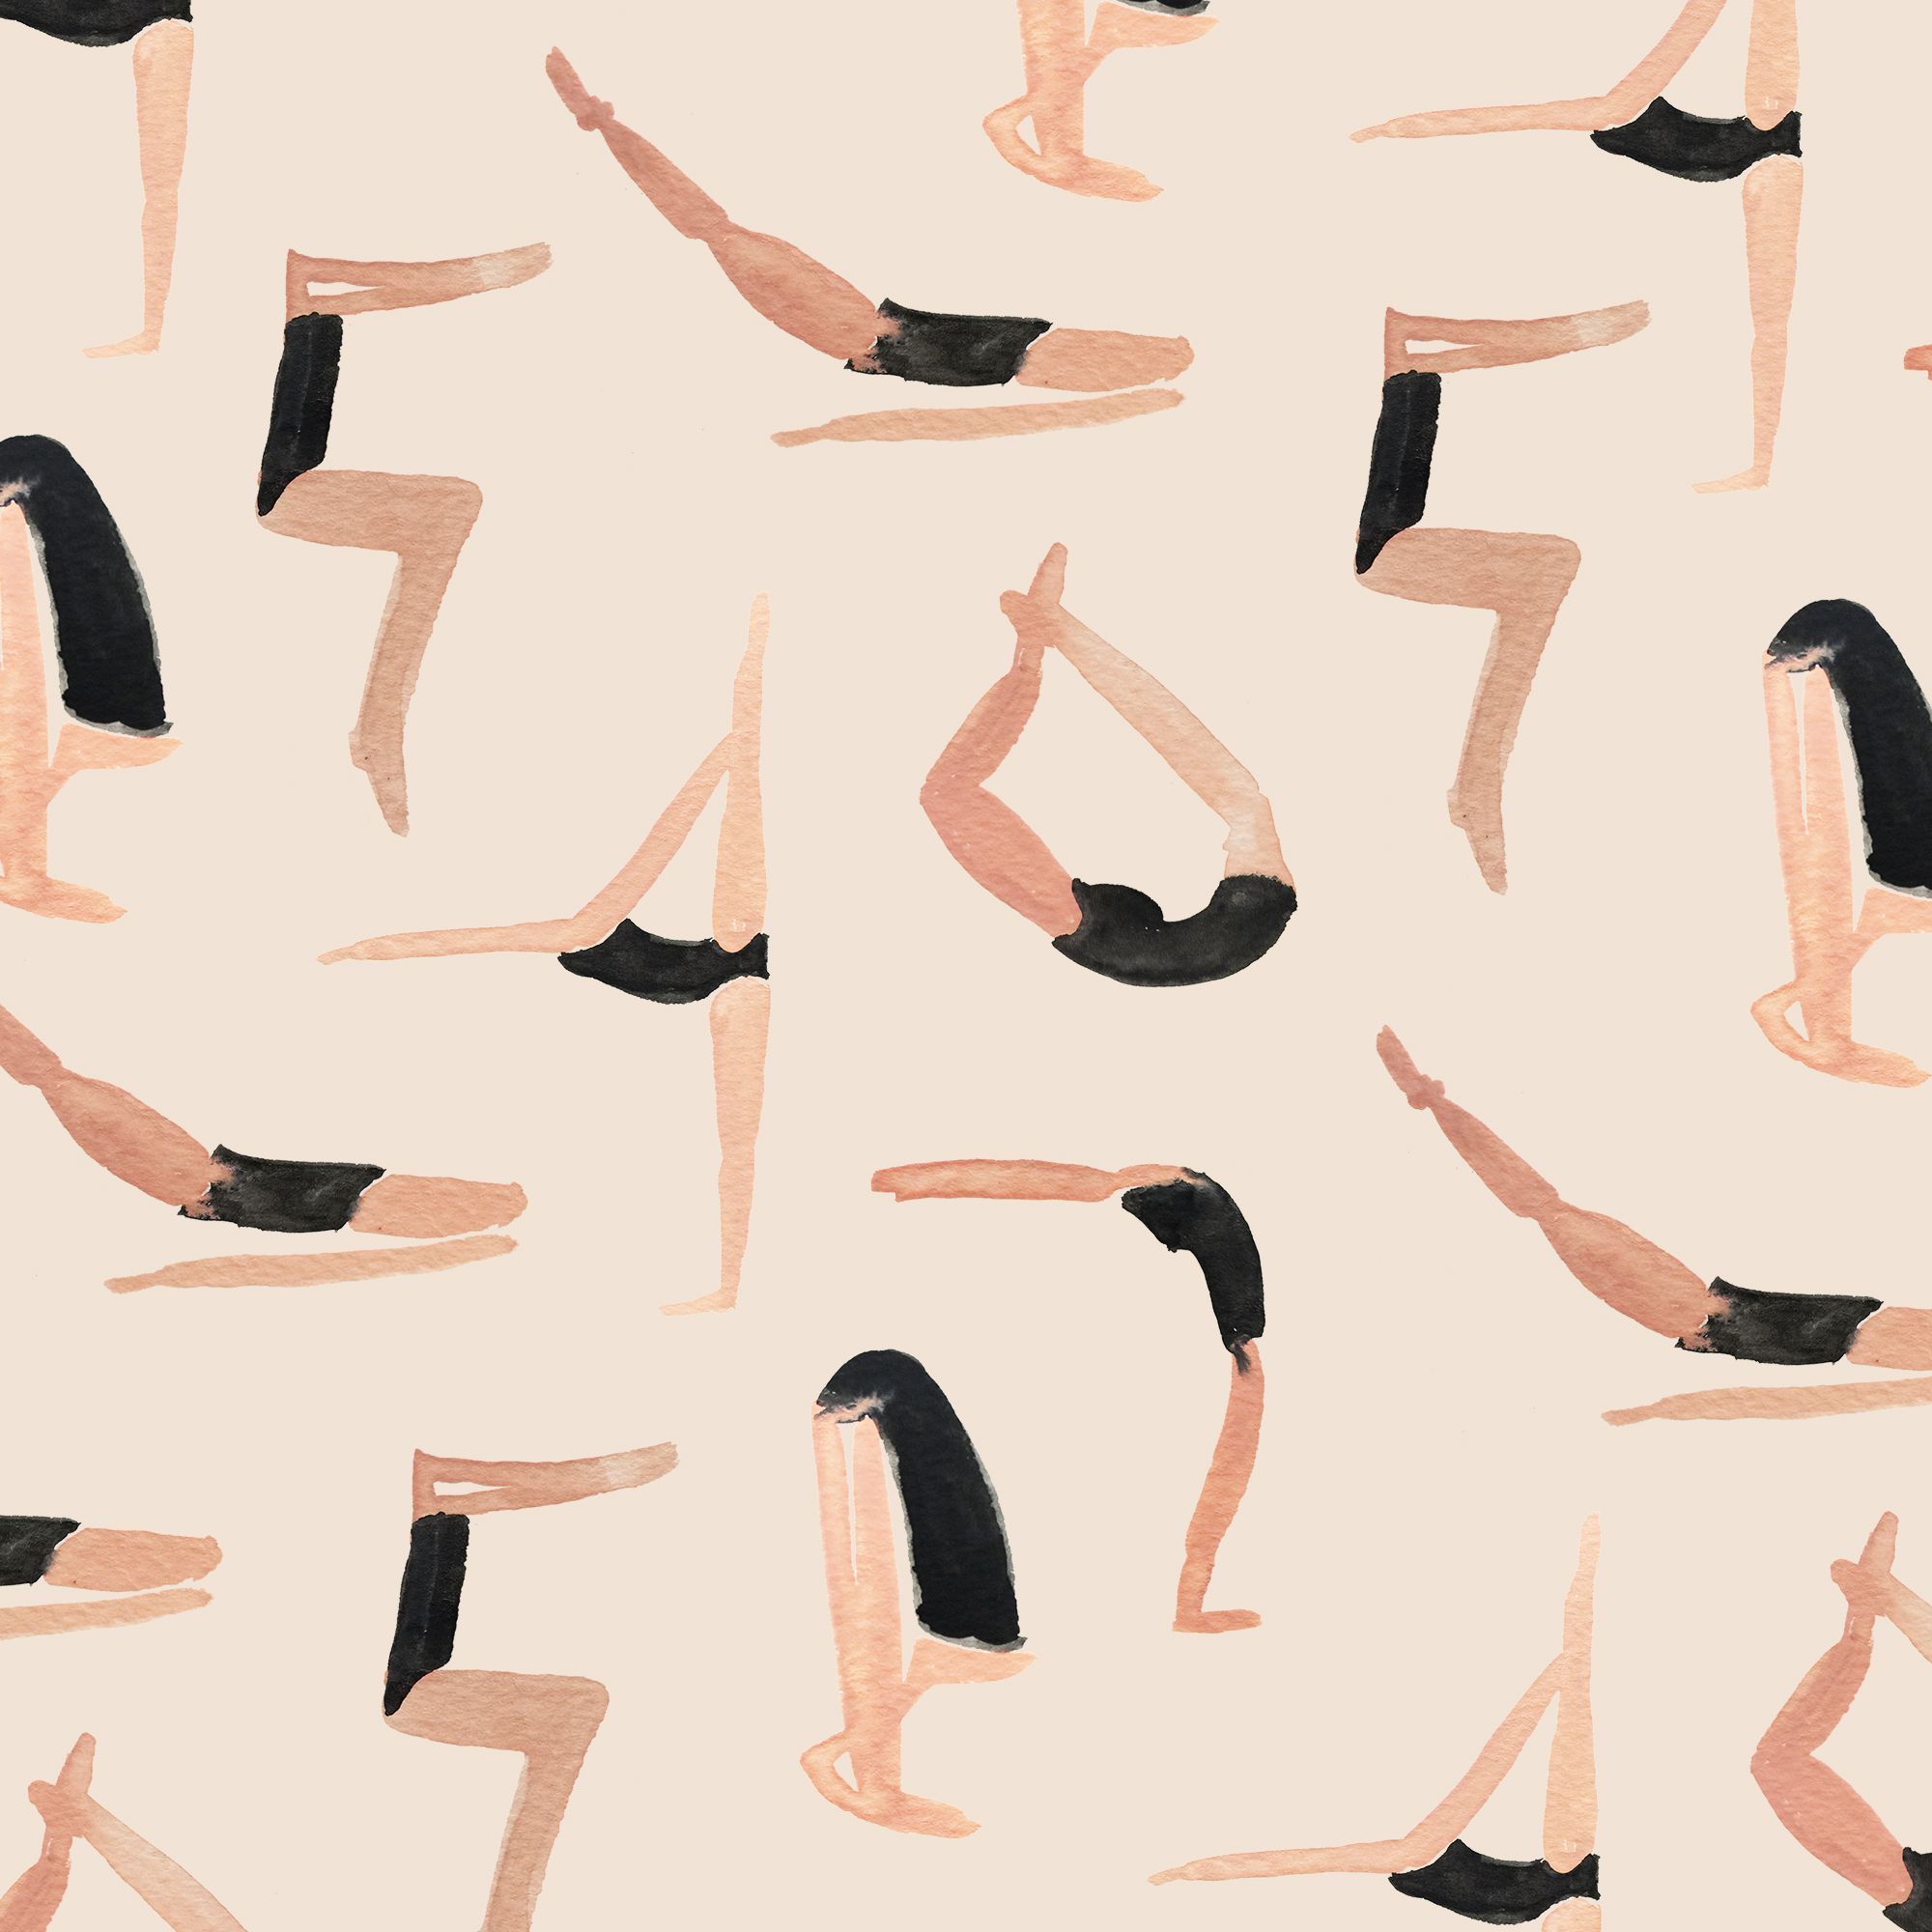 Yoga Class pattern by Sara Combs -   22 fitness design yoga poses
 ideas